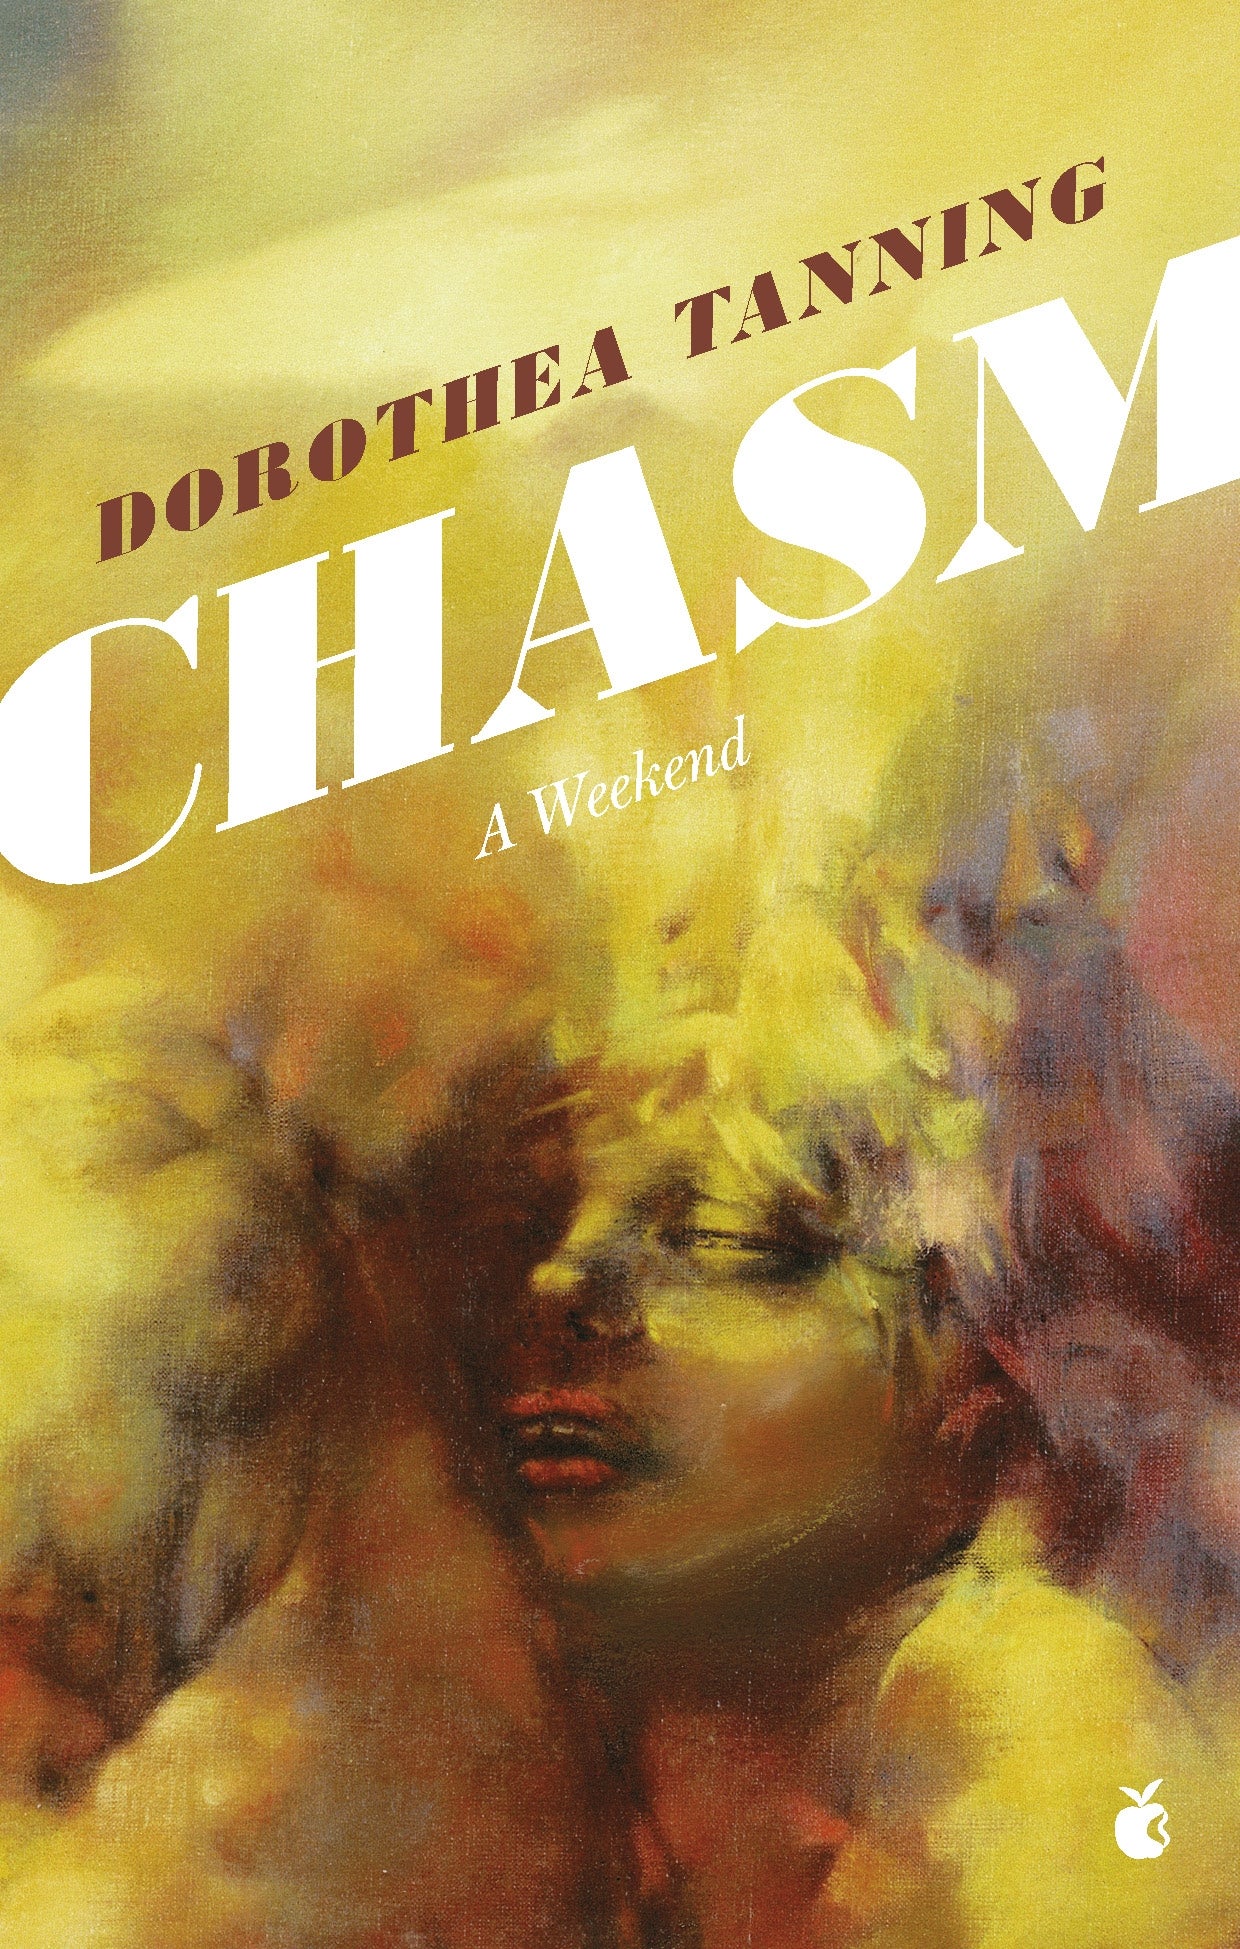 Chasm: A Weekend by Dorothea Tanning